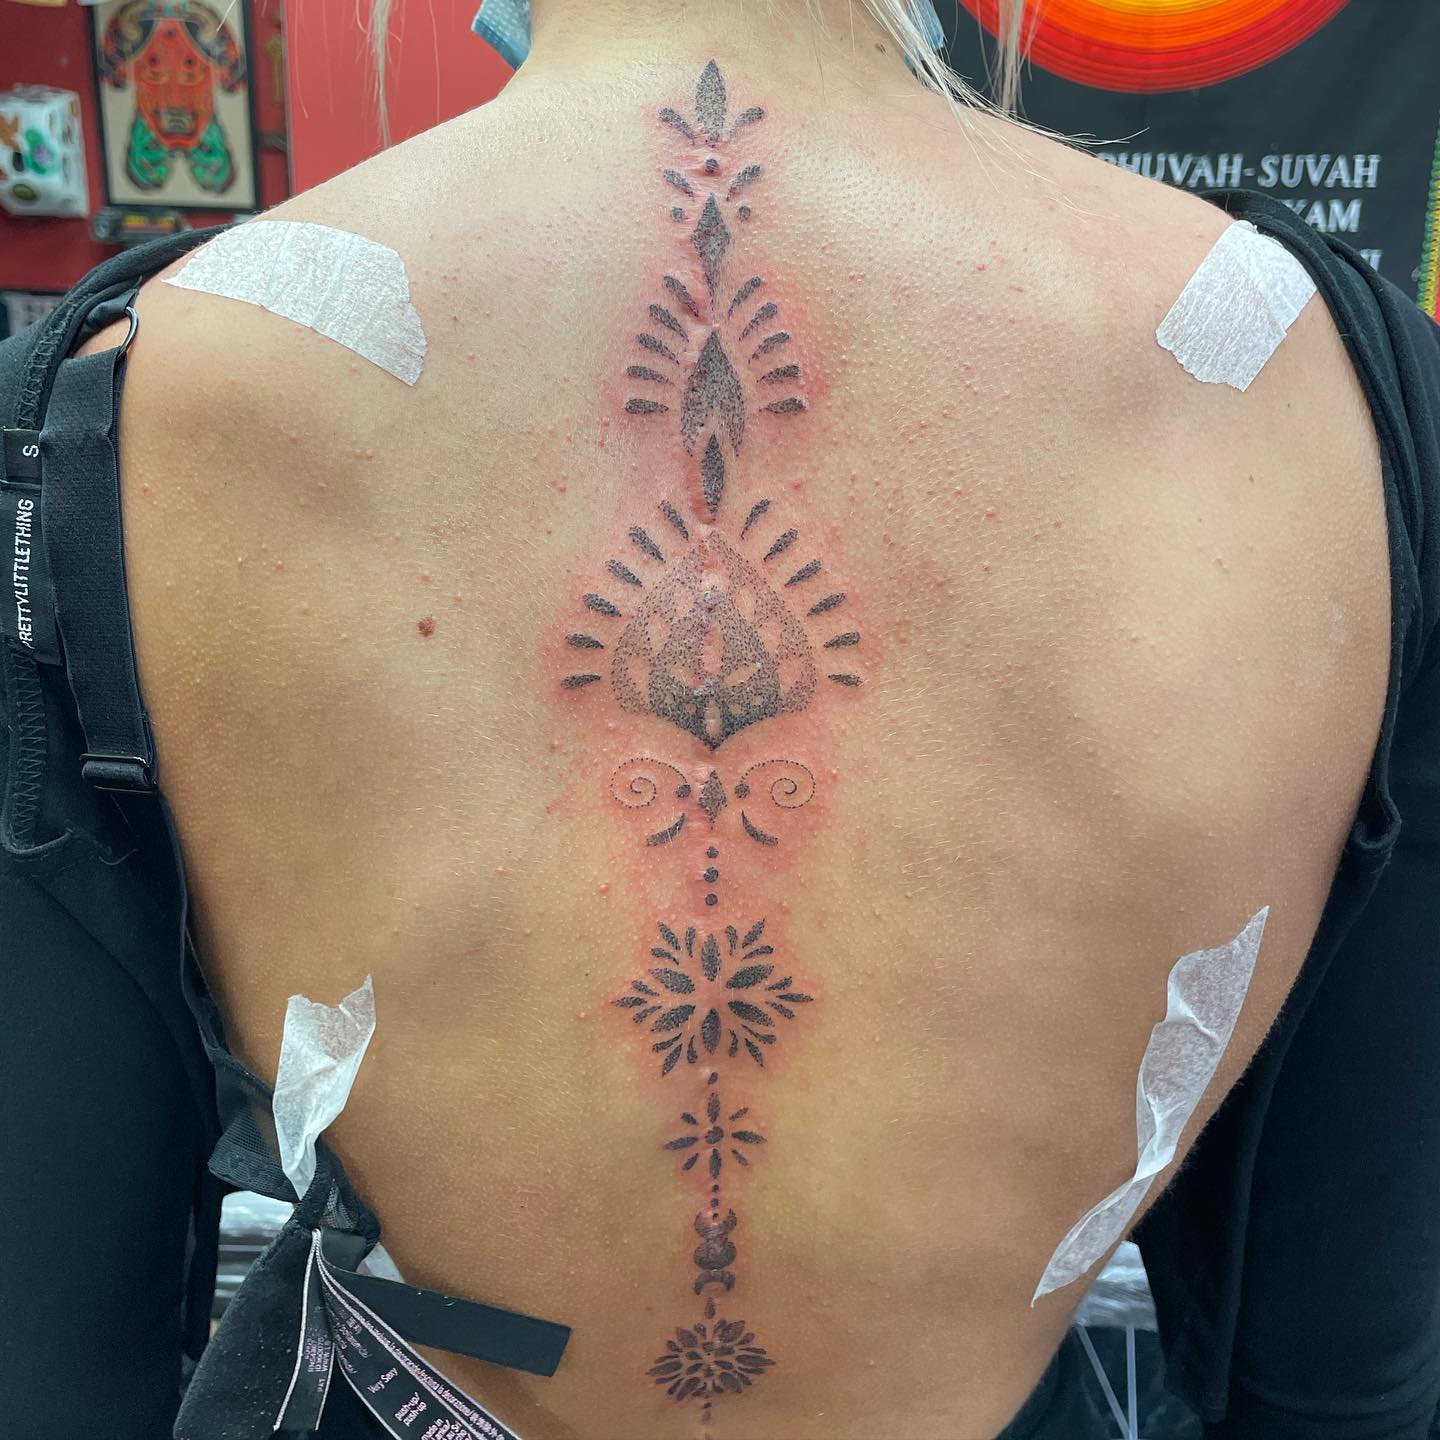 Scoliosis surgery scar cover up for Pippa from last week- thank you so much for you trust- much appreciated and well sat, and thank you for letting me share the “before” pic🙏👌Done studioxiiigallery 🙌
                       